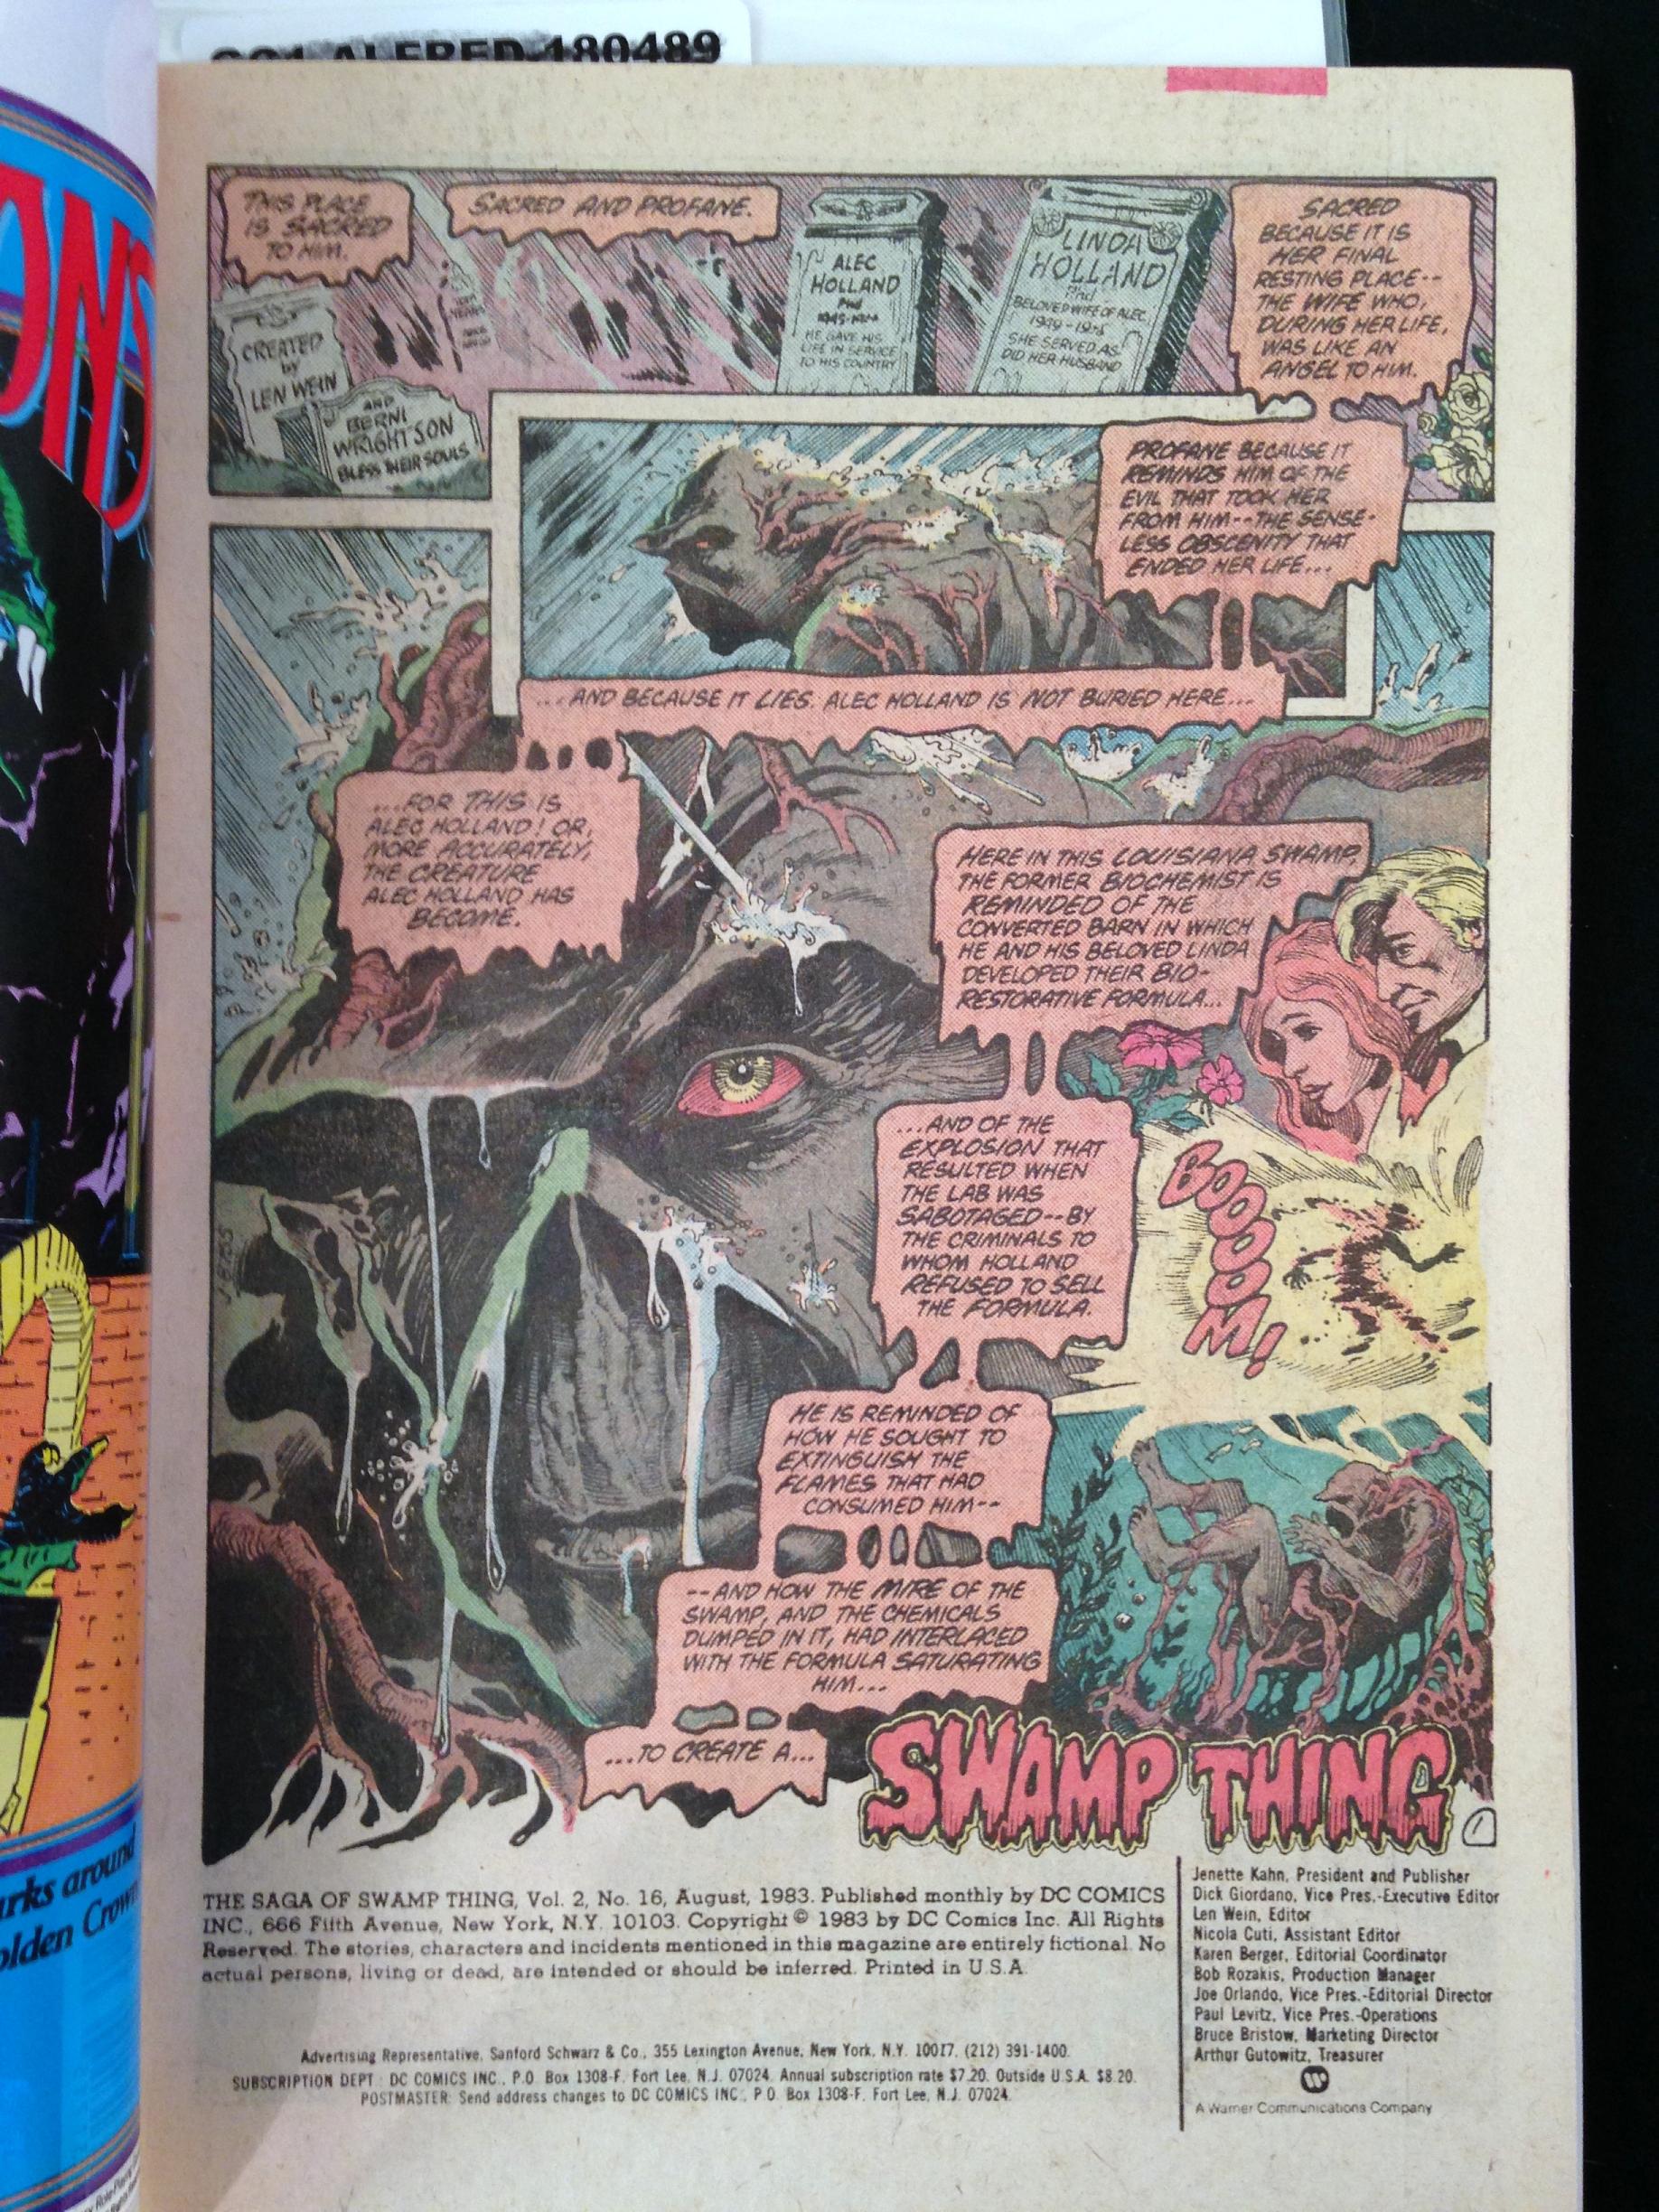 Swamp Thing 1-17 Pasko Collection (25)